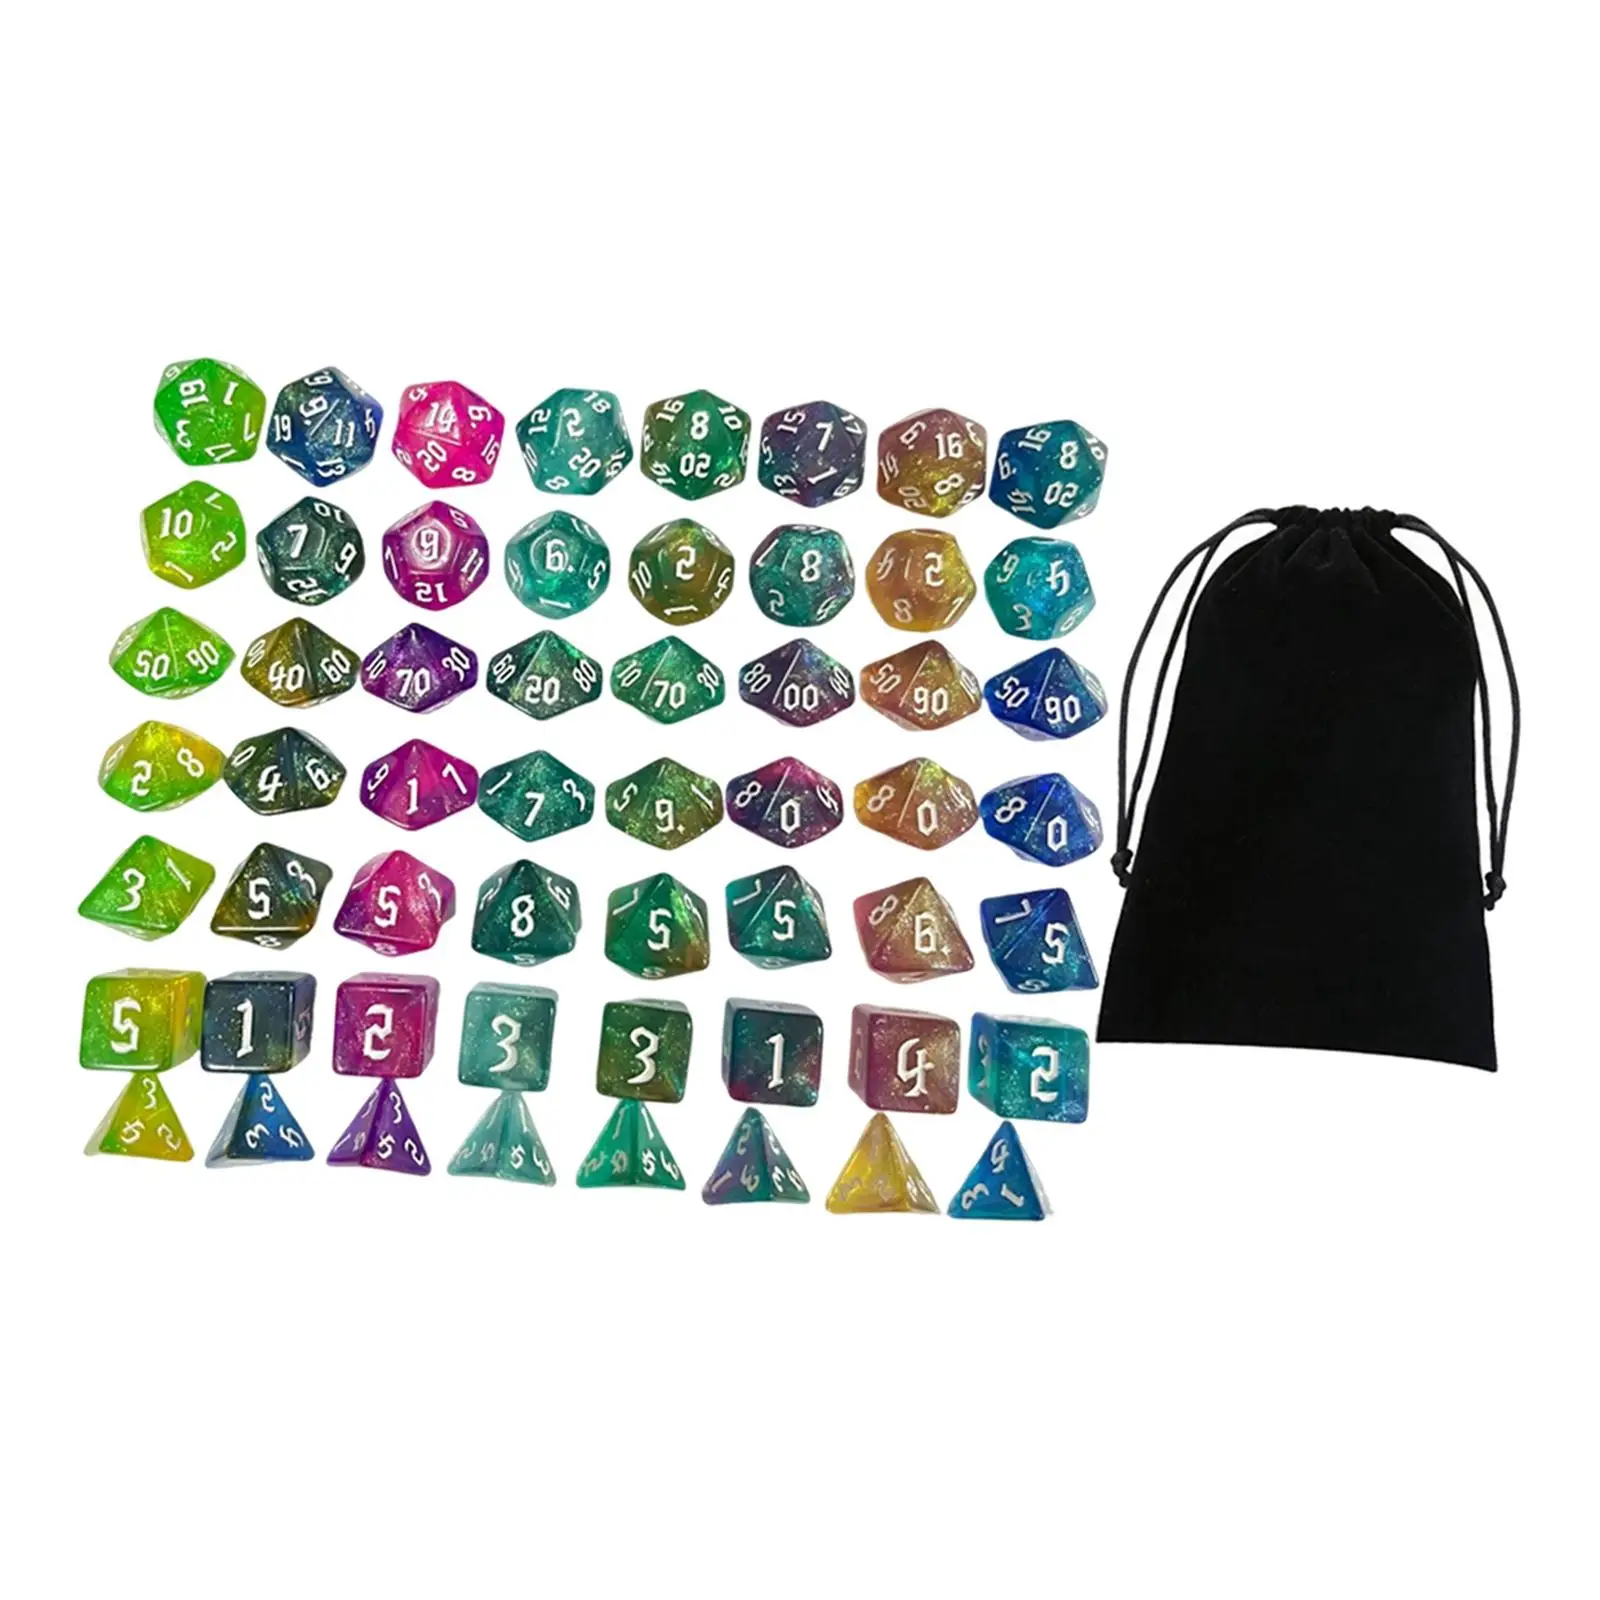 Engraved Polyhedral Dices Set Entertainment Toy 56x Game Dices Rolling Dices for Board Game Props KTV Roll Playing Games Parties